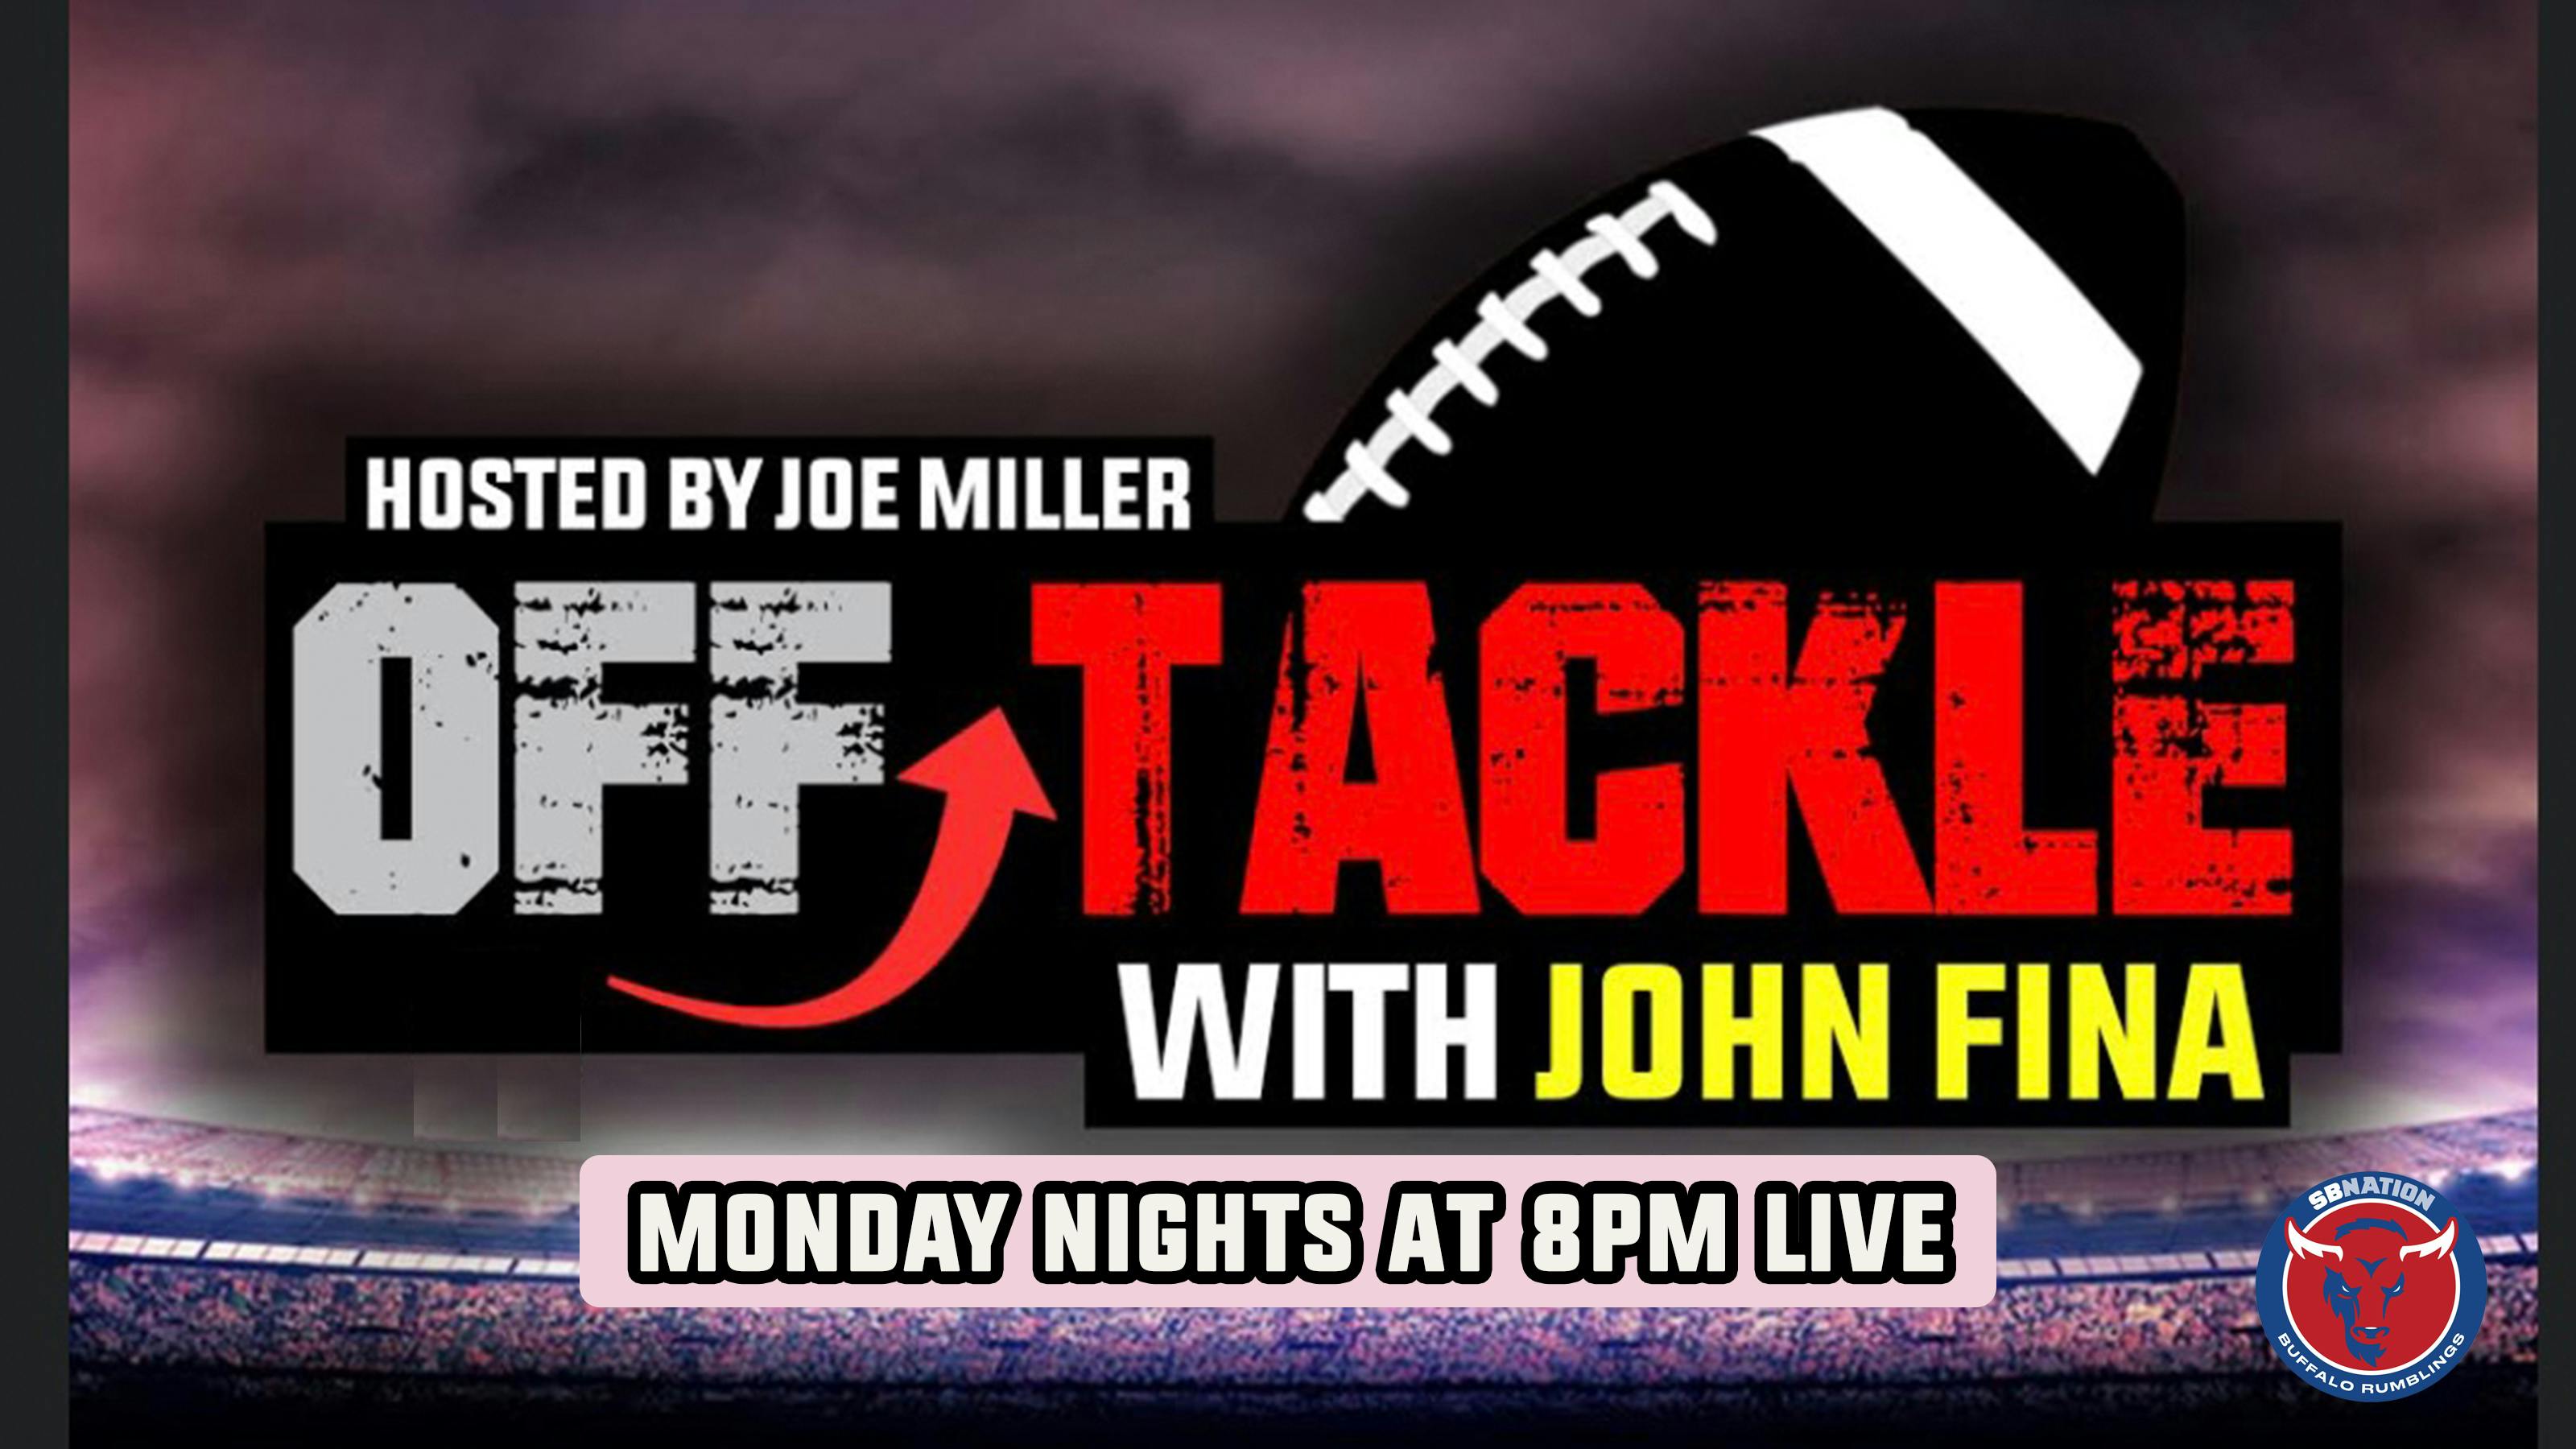 Off Tackle with John Fina Show | #BILLS Romp the Ravens